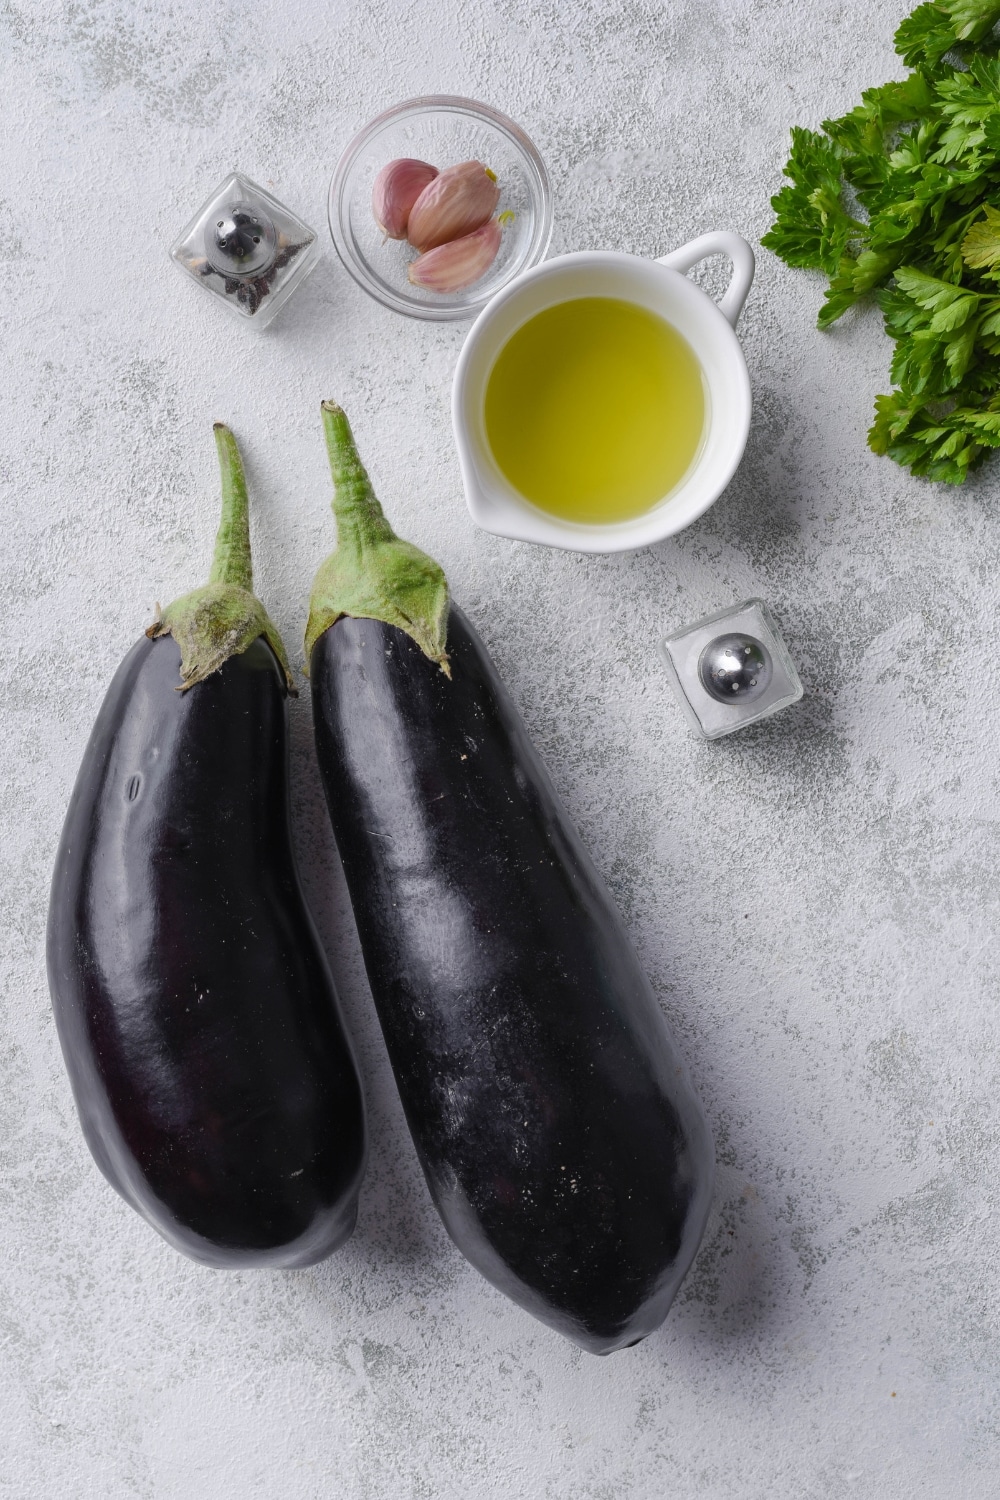 Two eggplants, a small pitcher of olive oil, a small bowl with three cloves of garlic, a bunch of parsley, and salt and pepper shakers.